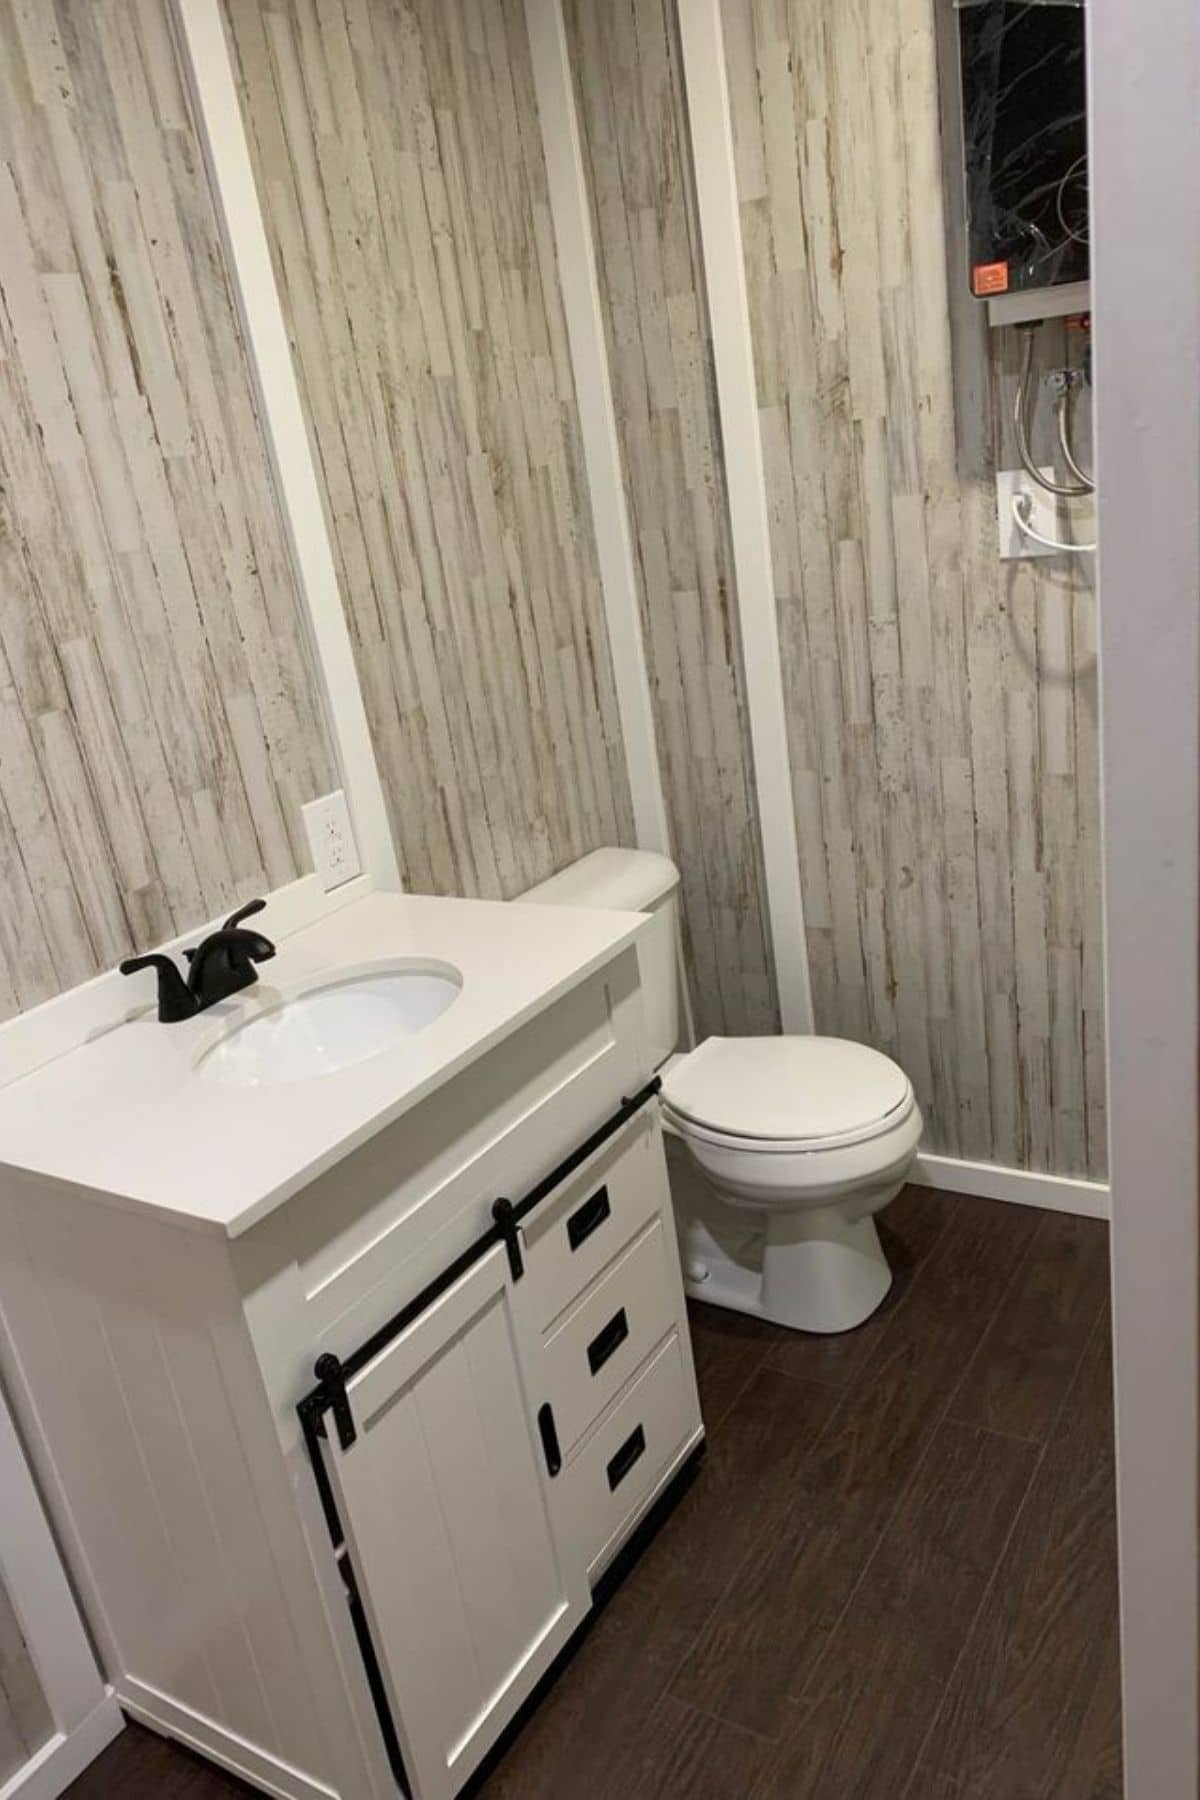 gray and white paneling on bathroom walls by white vanity and toilet